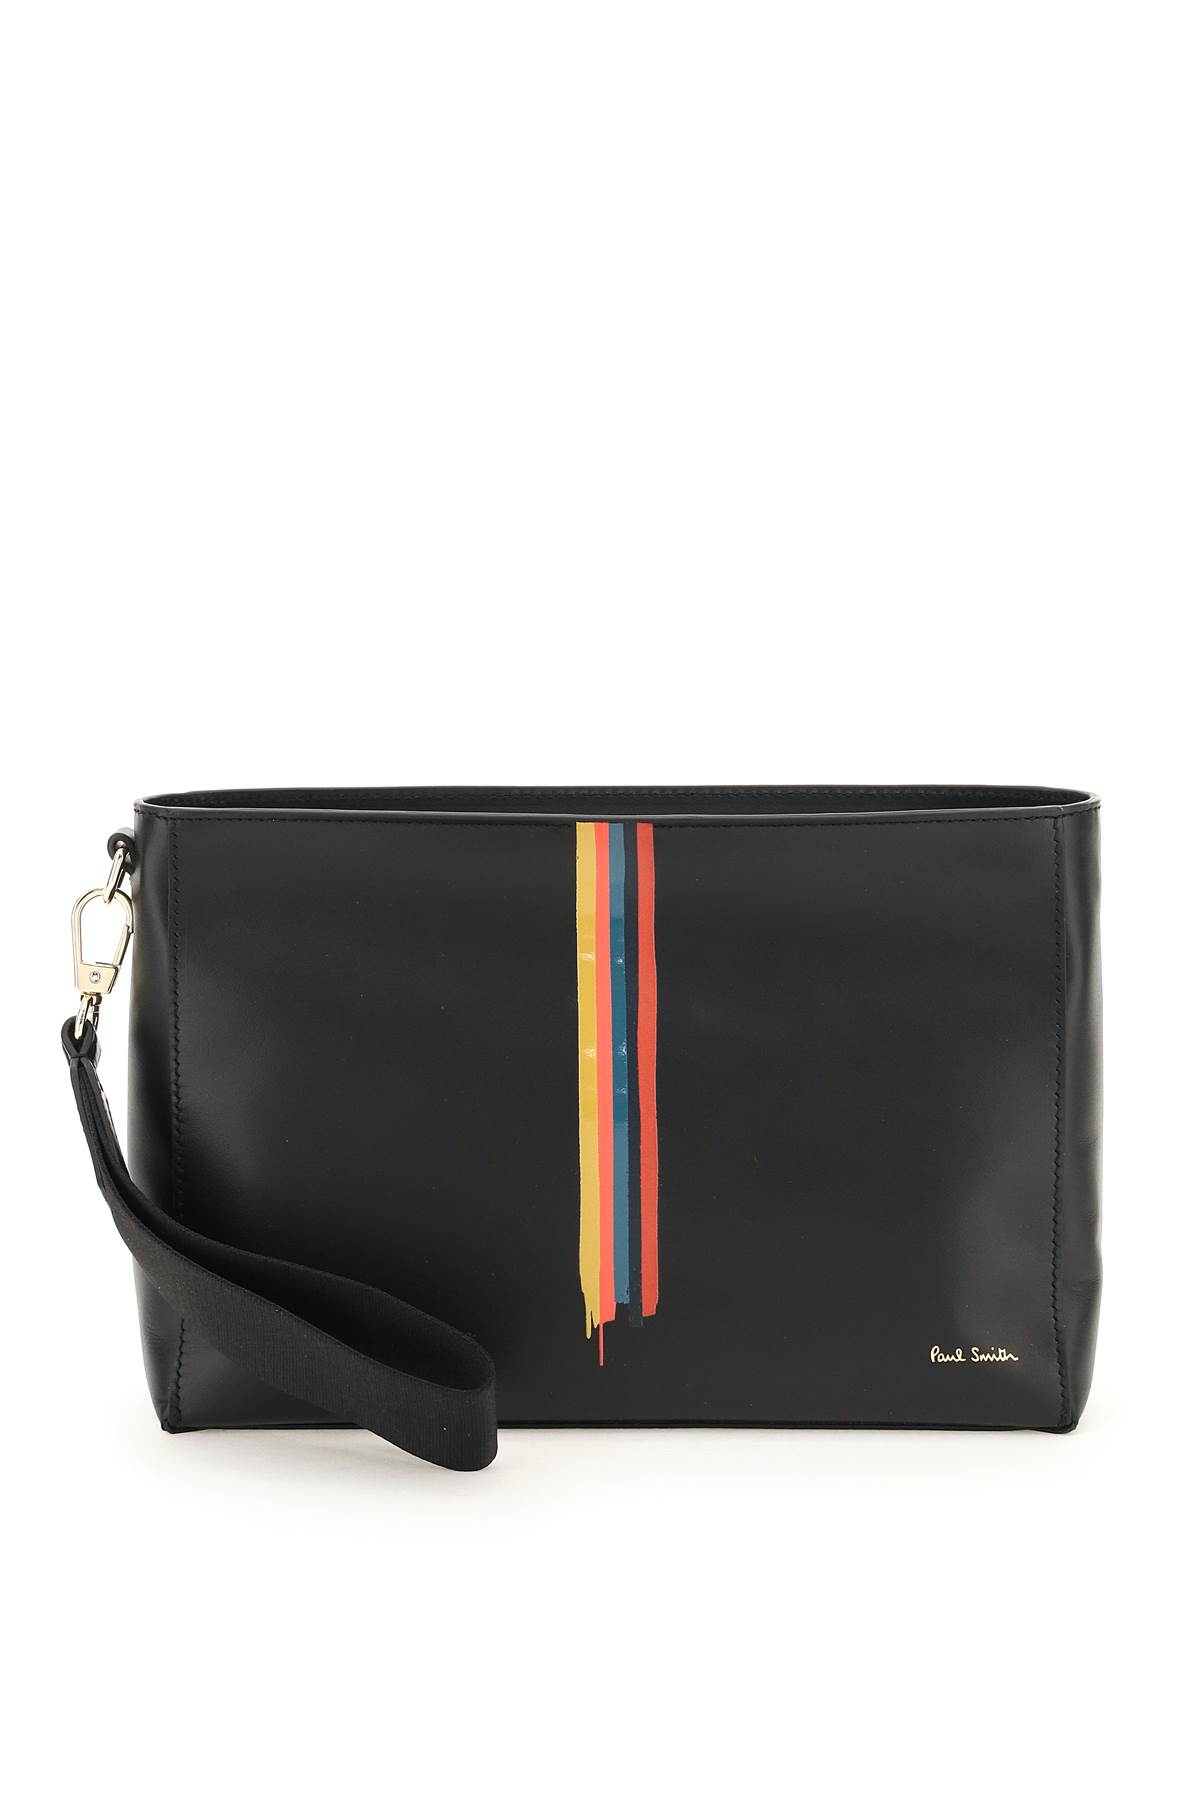 Paul Smith painted Stripe Leather Pouch